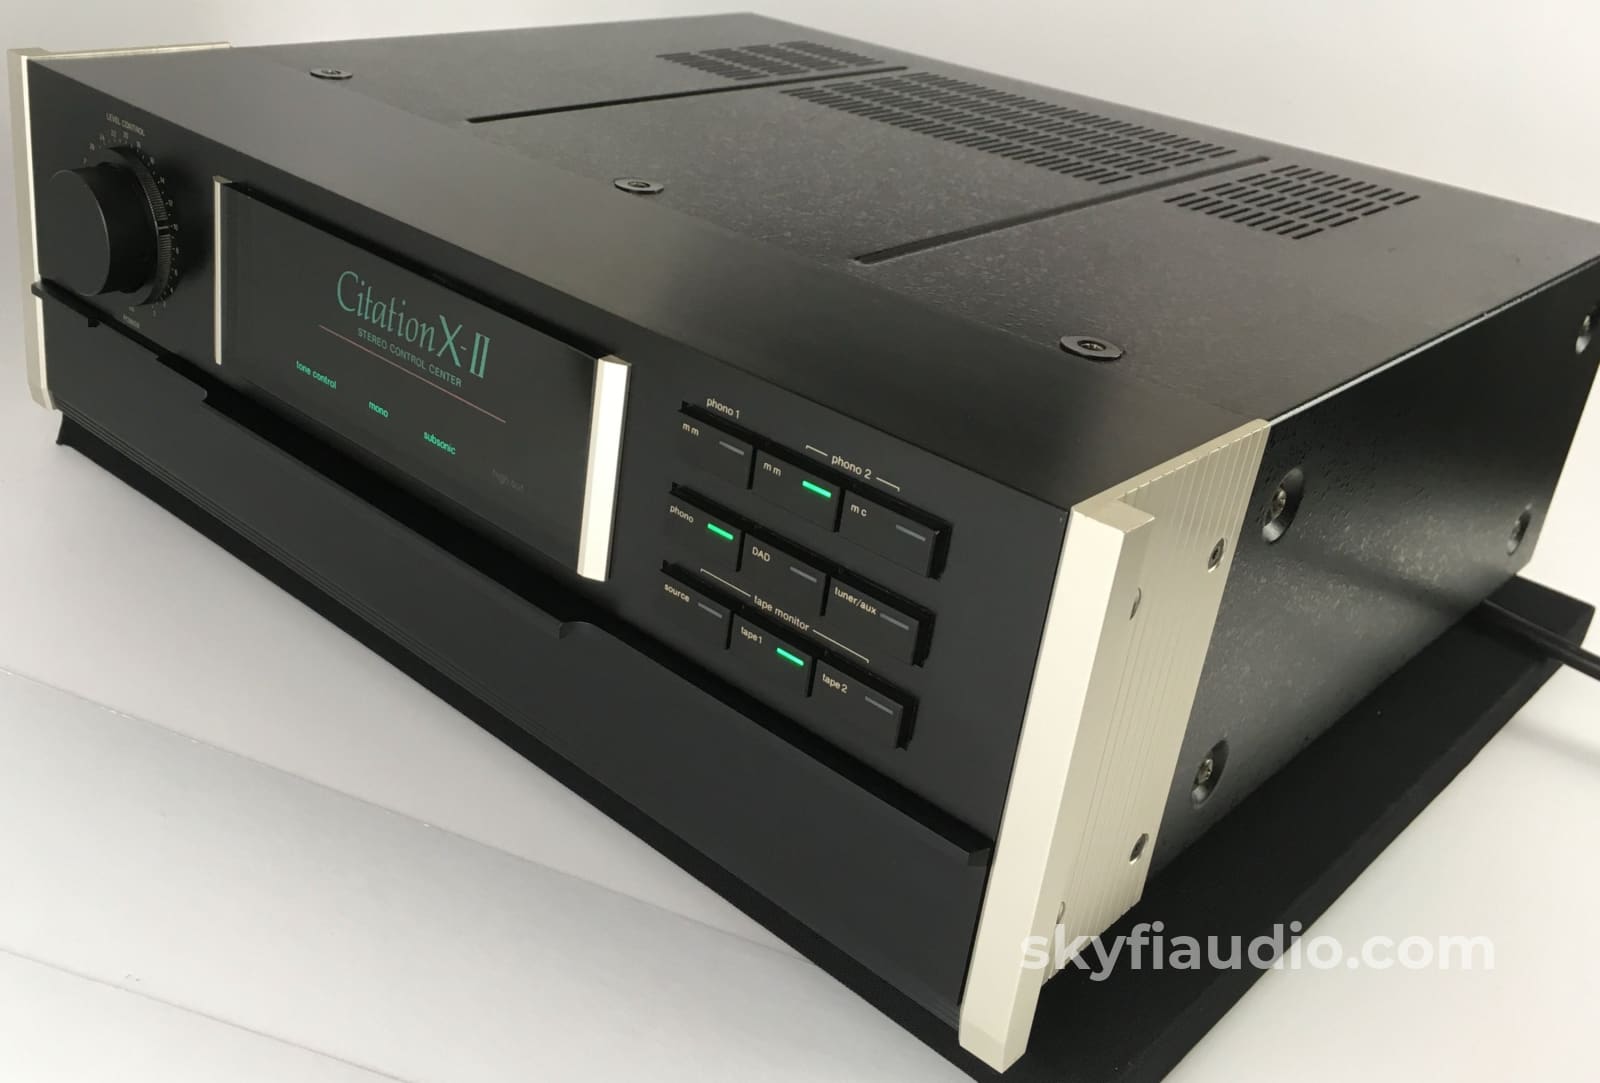 Harman Kardon Citation X-I And X-Ii Matching Preamp Amplifier - Very Rare Collectable Preamplifier